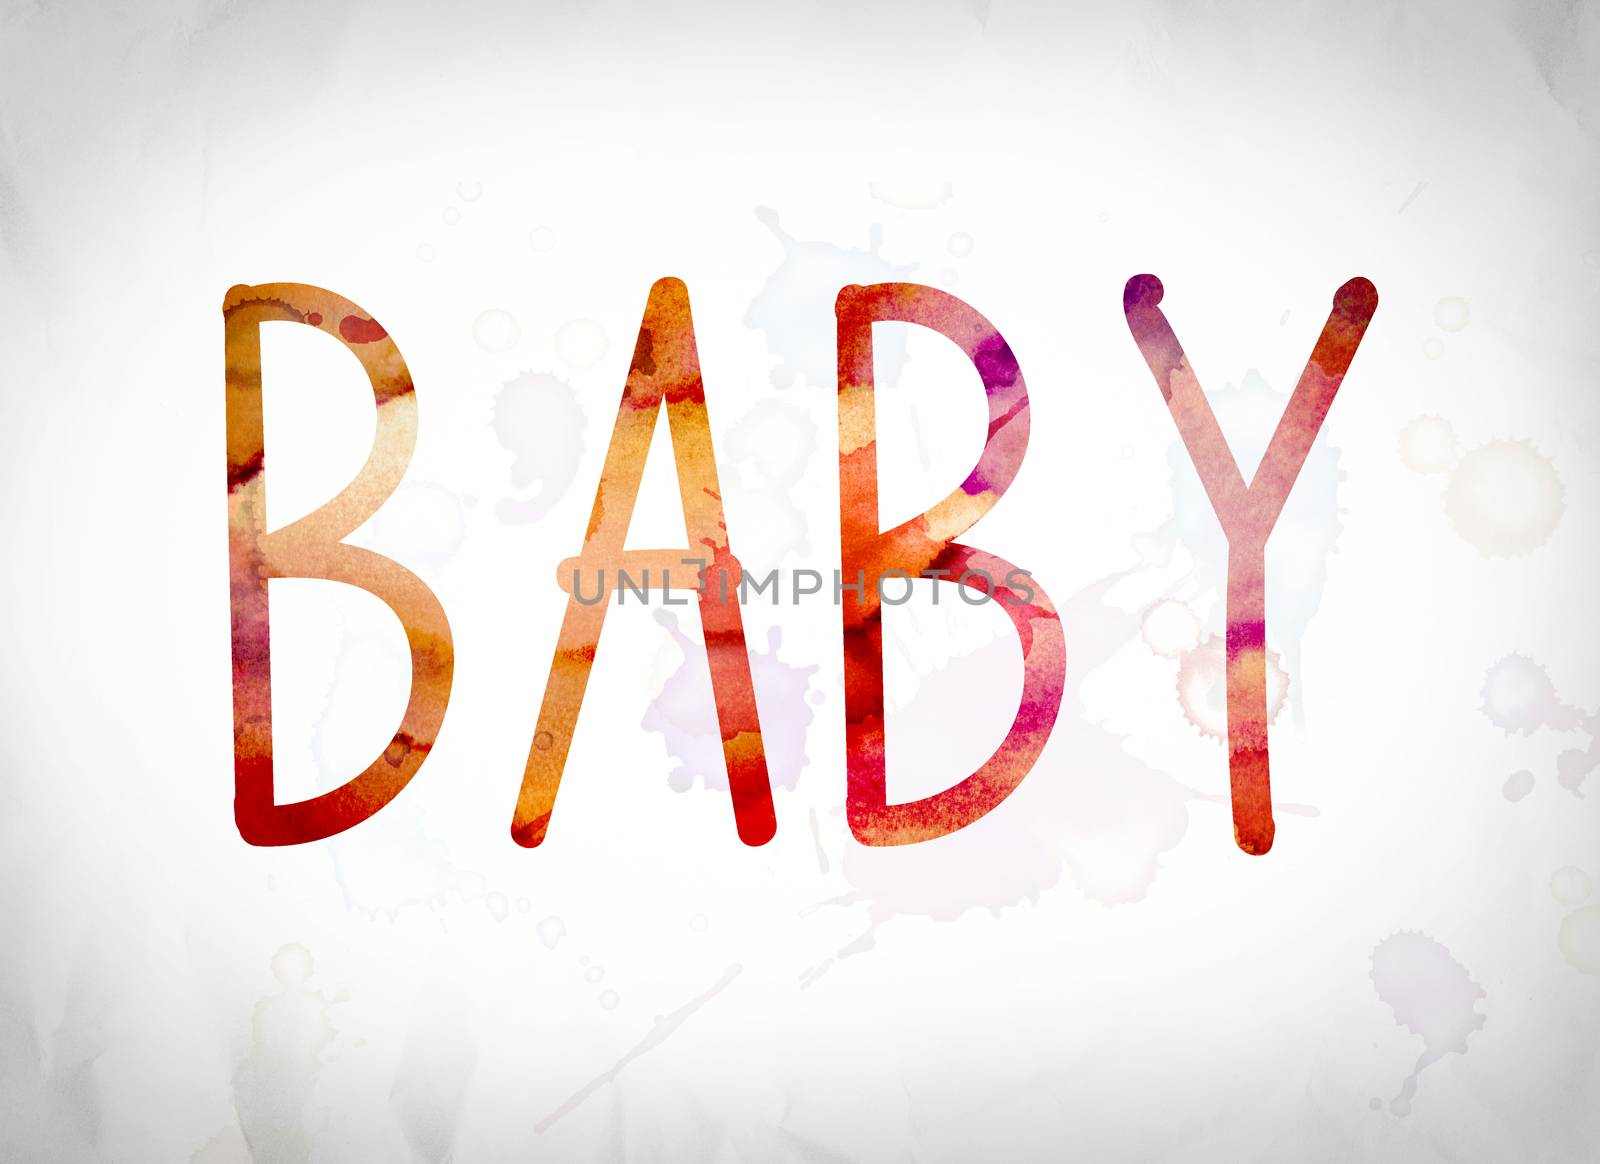 The word "Baby" written in watercolor washes over a white paper background concept and theme.